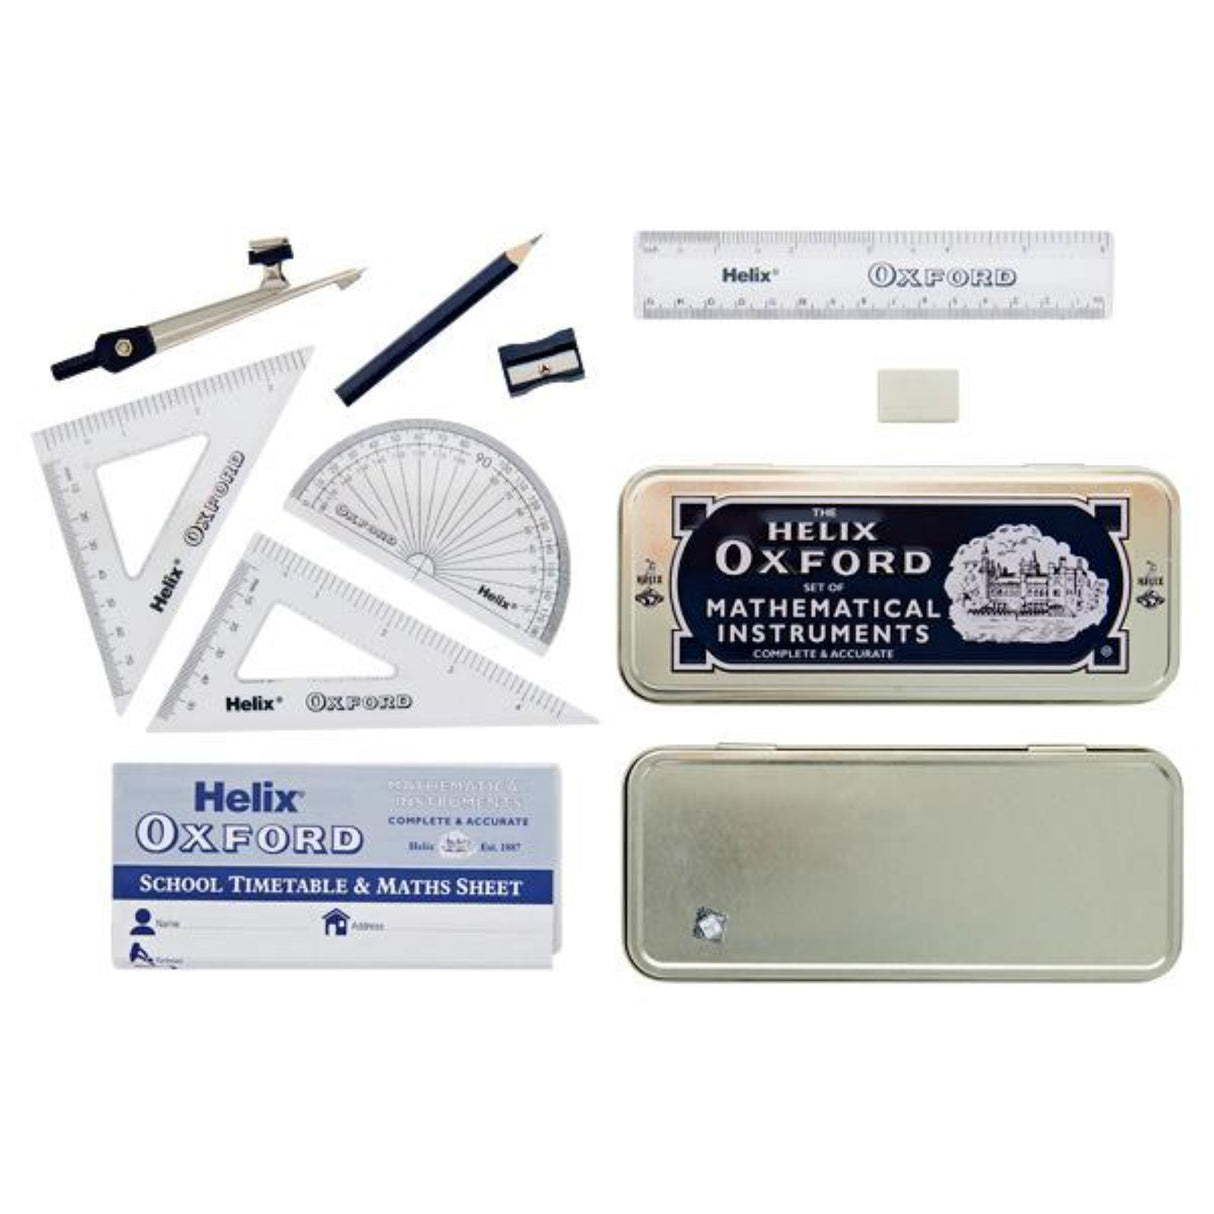 Helix Oxford Set of Mathematical Instruments - Complete & Accurate-Math Sets-Helix|StationeryShop.co.uk